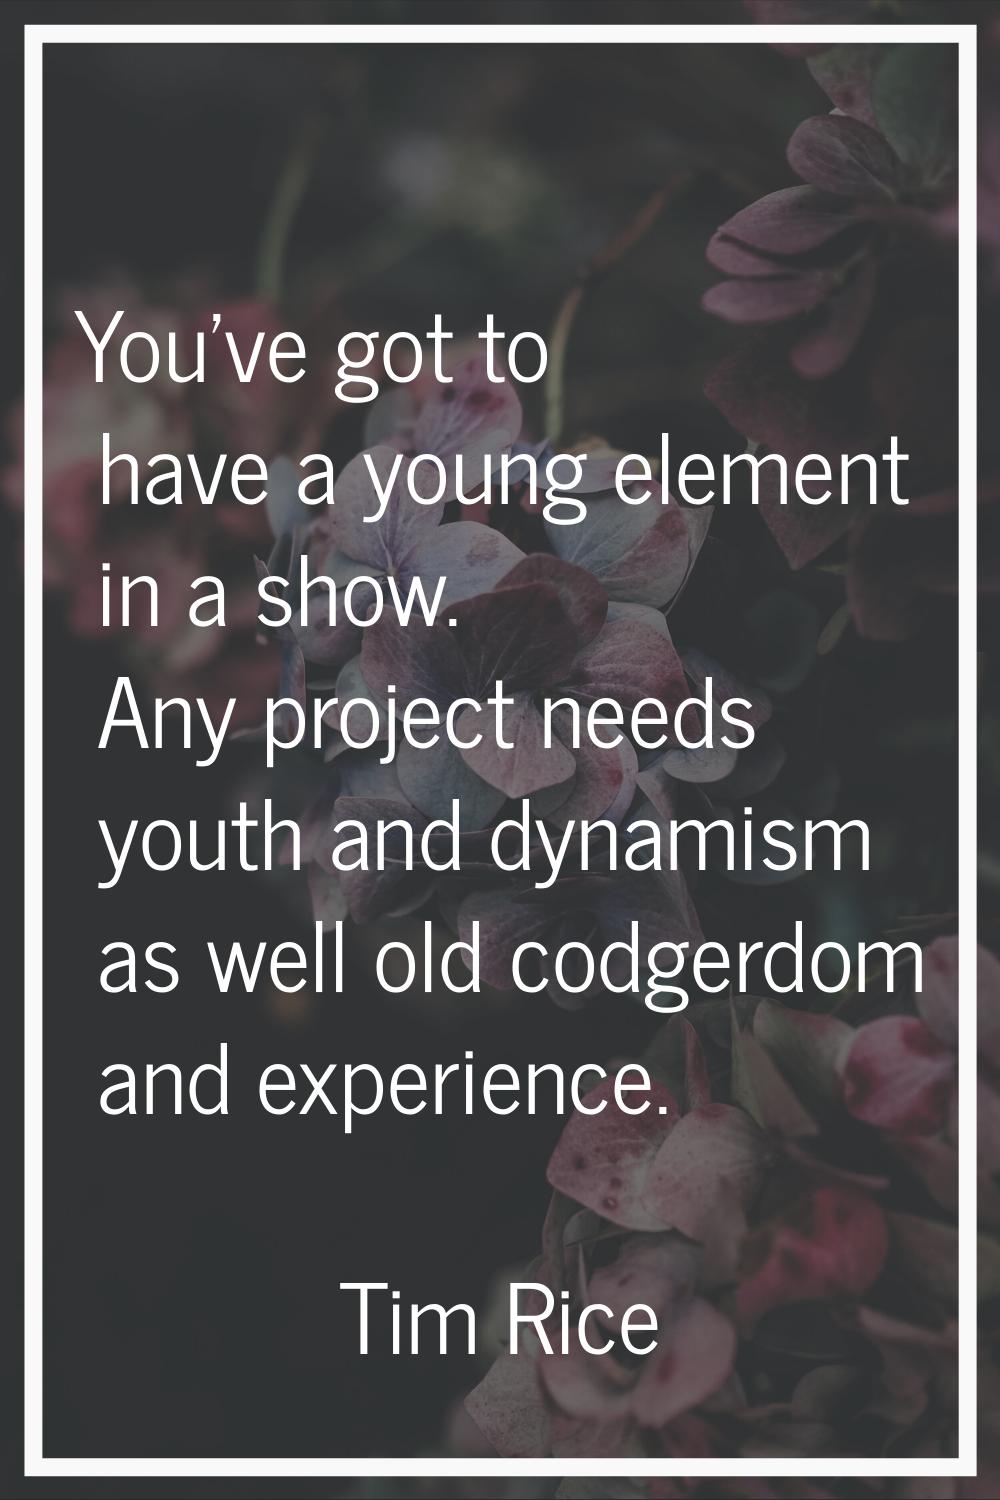 You've got to have a young element in a show. Any project needs youth and dynamism as well old codg